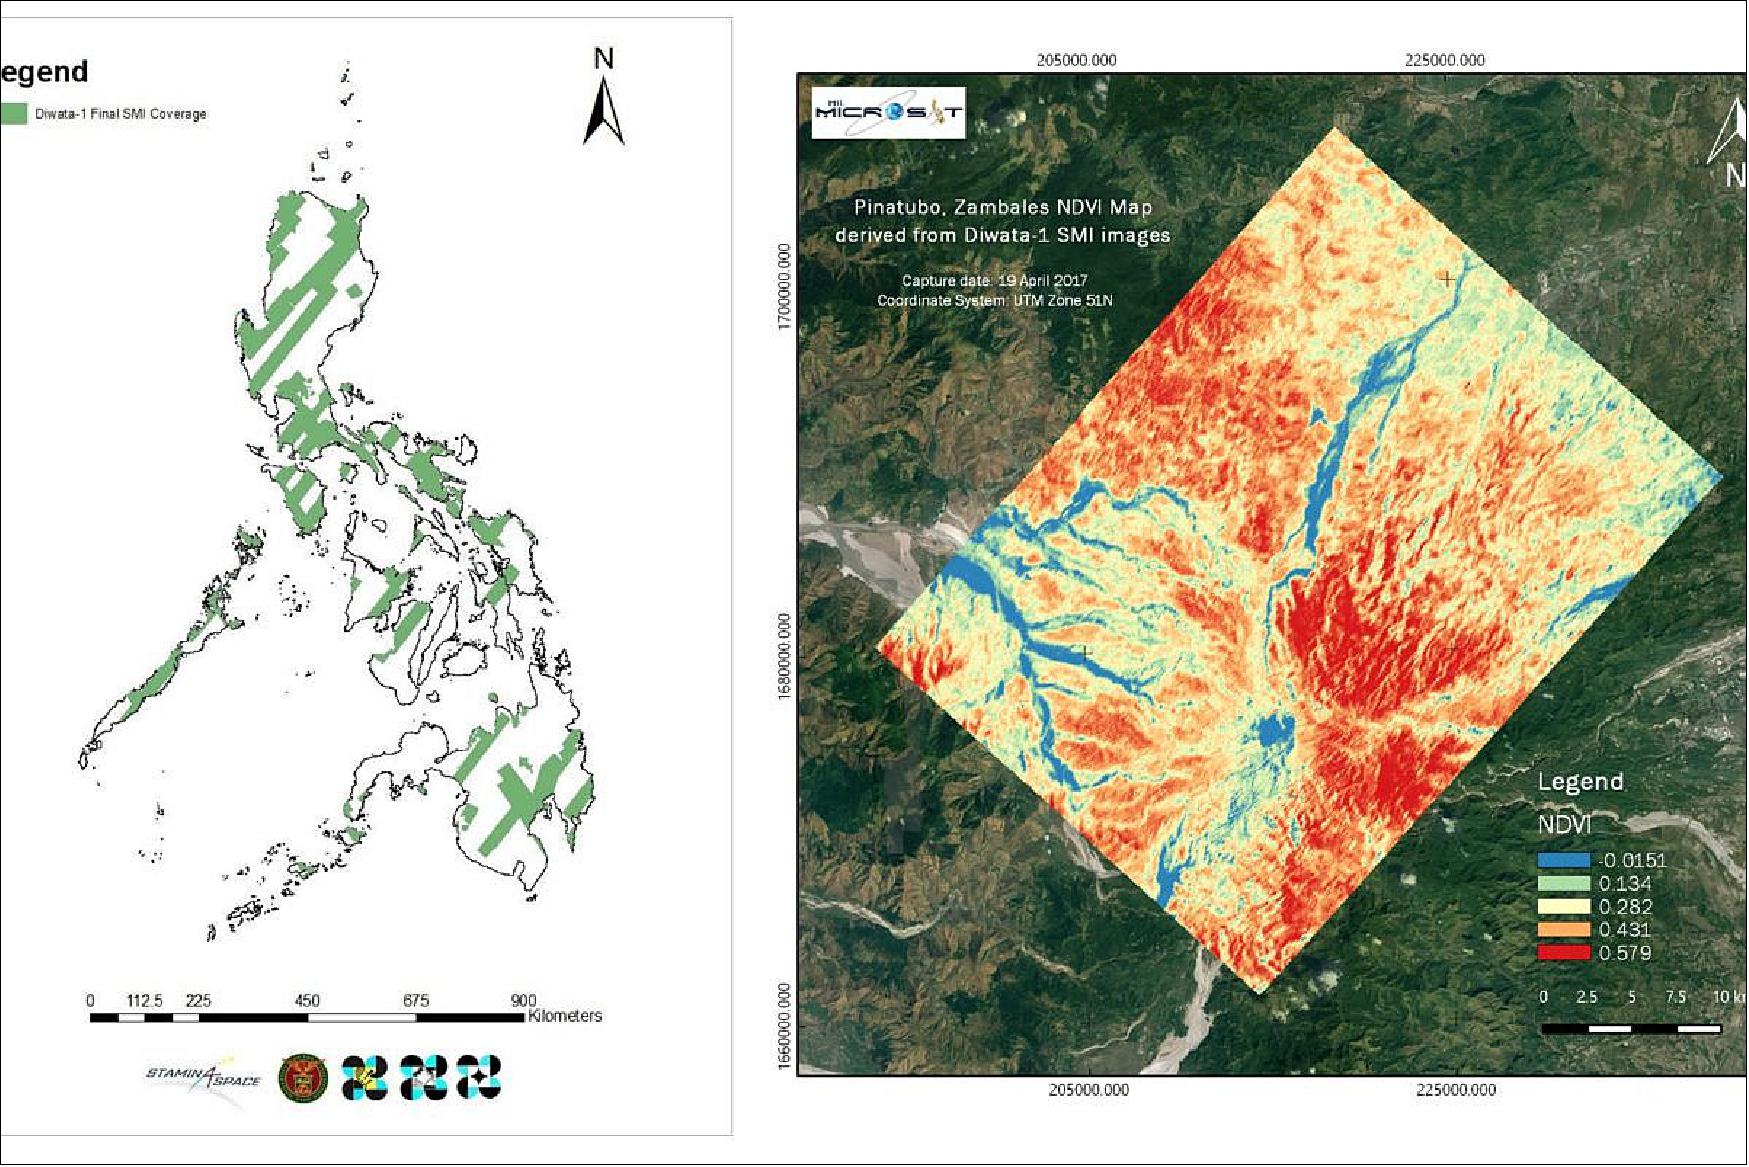 Figure 7: Left: A visual representation of Diwata-1's coverage of the Philippines during its four-year mission. Right: A derived NDVI image of Mount Pinatubo taken by the Diwata-1 Spaceborne Multispectral Imager sensor on April 19, 2017. The reddish patches represent the local flora in the area (image credit: STAMINA4Space Program)